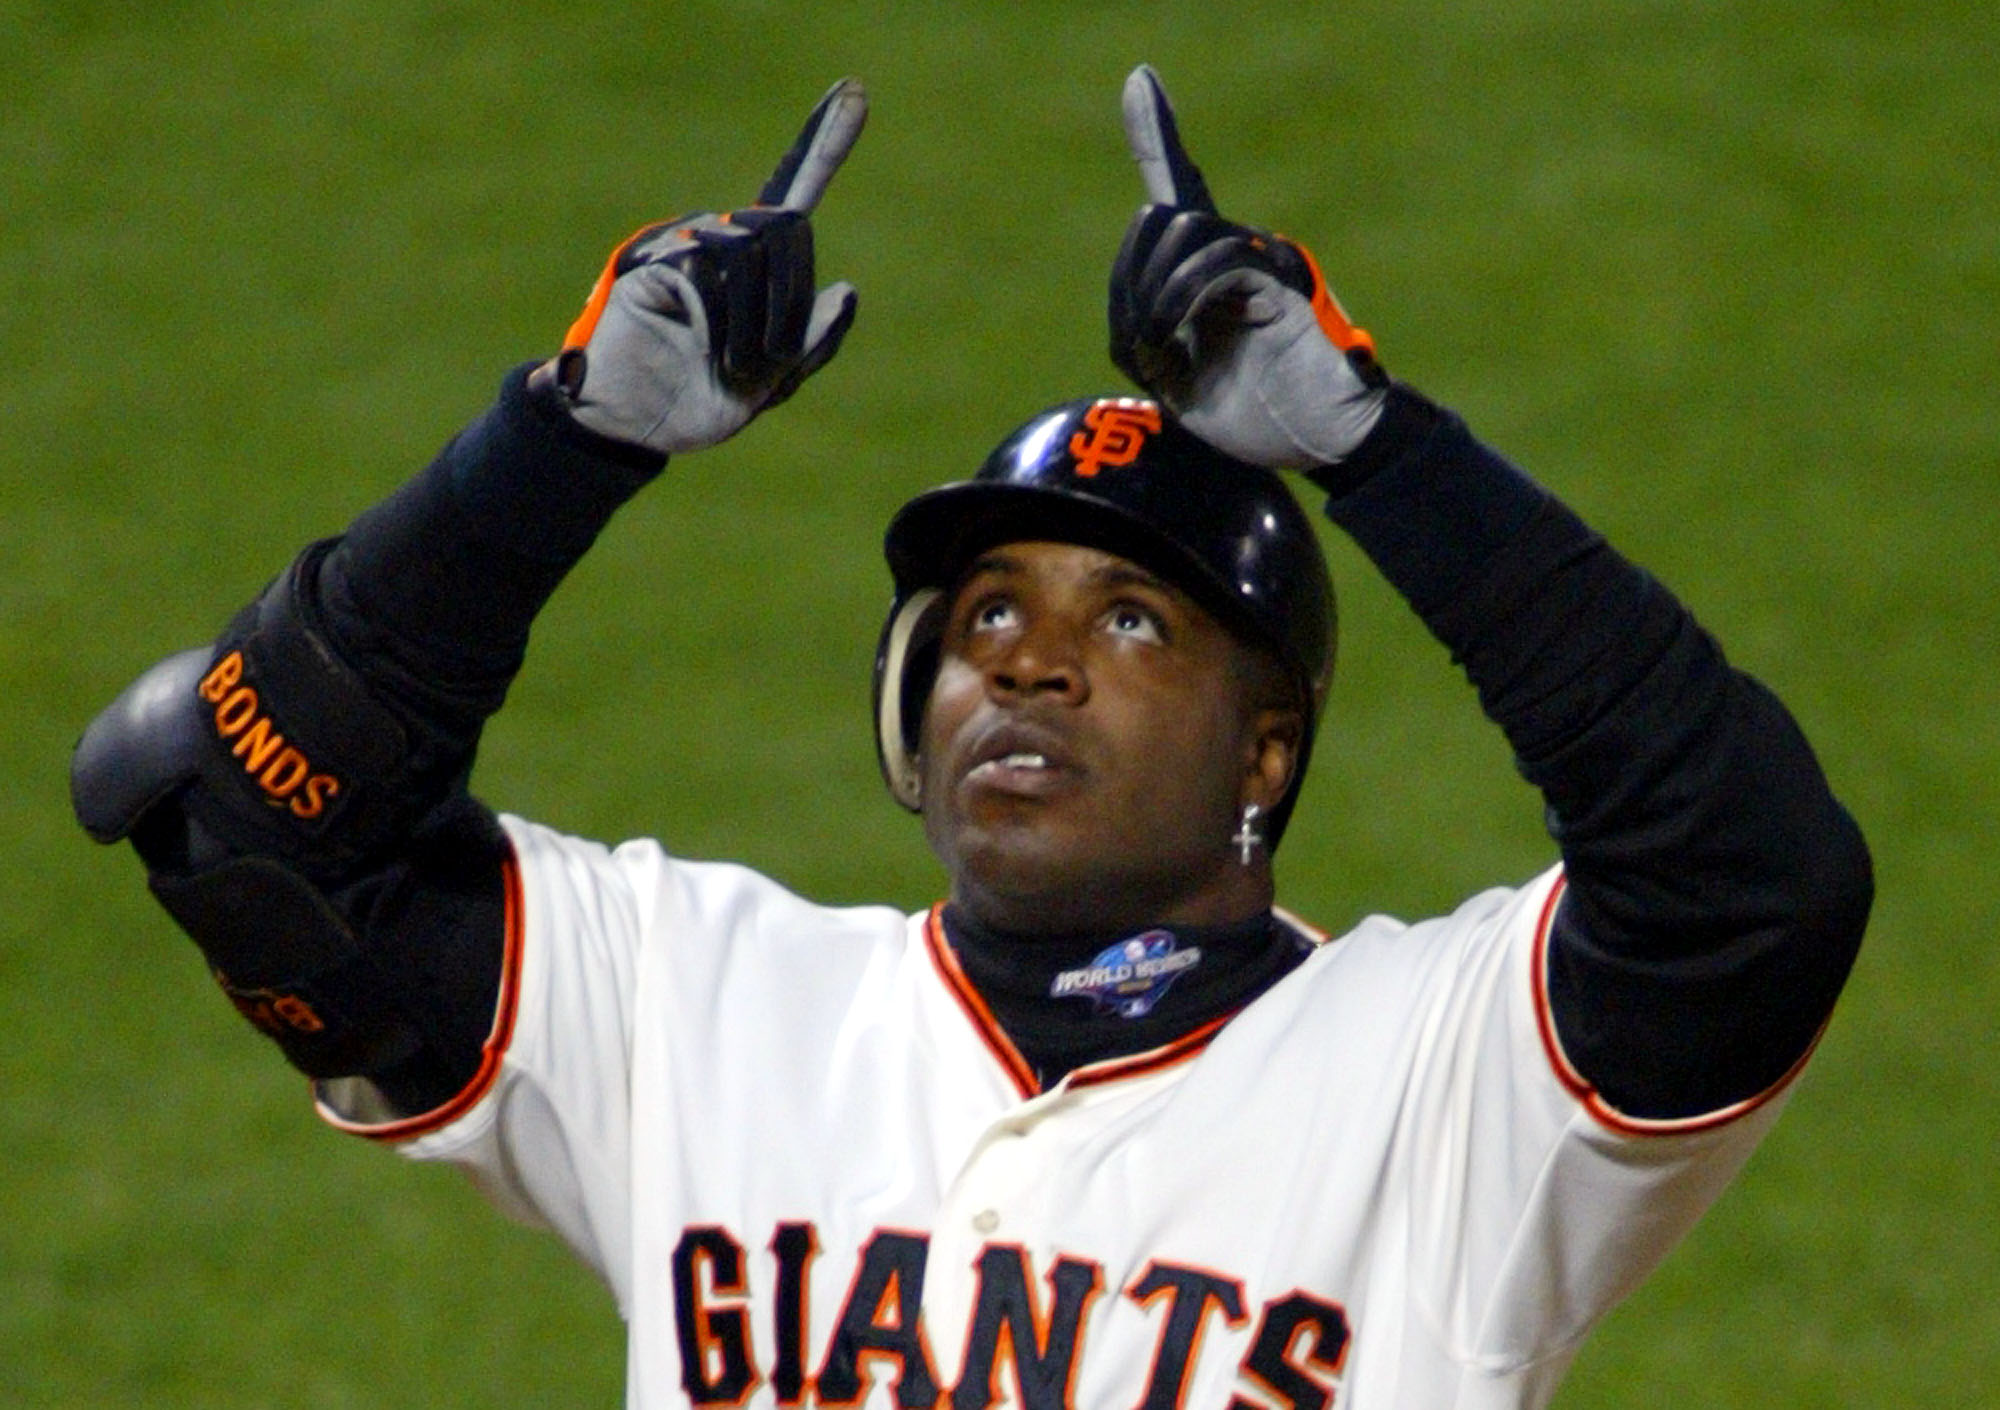 MLB: Home run king Bonds wishes he played one more year